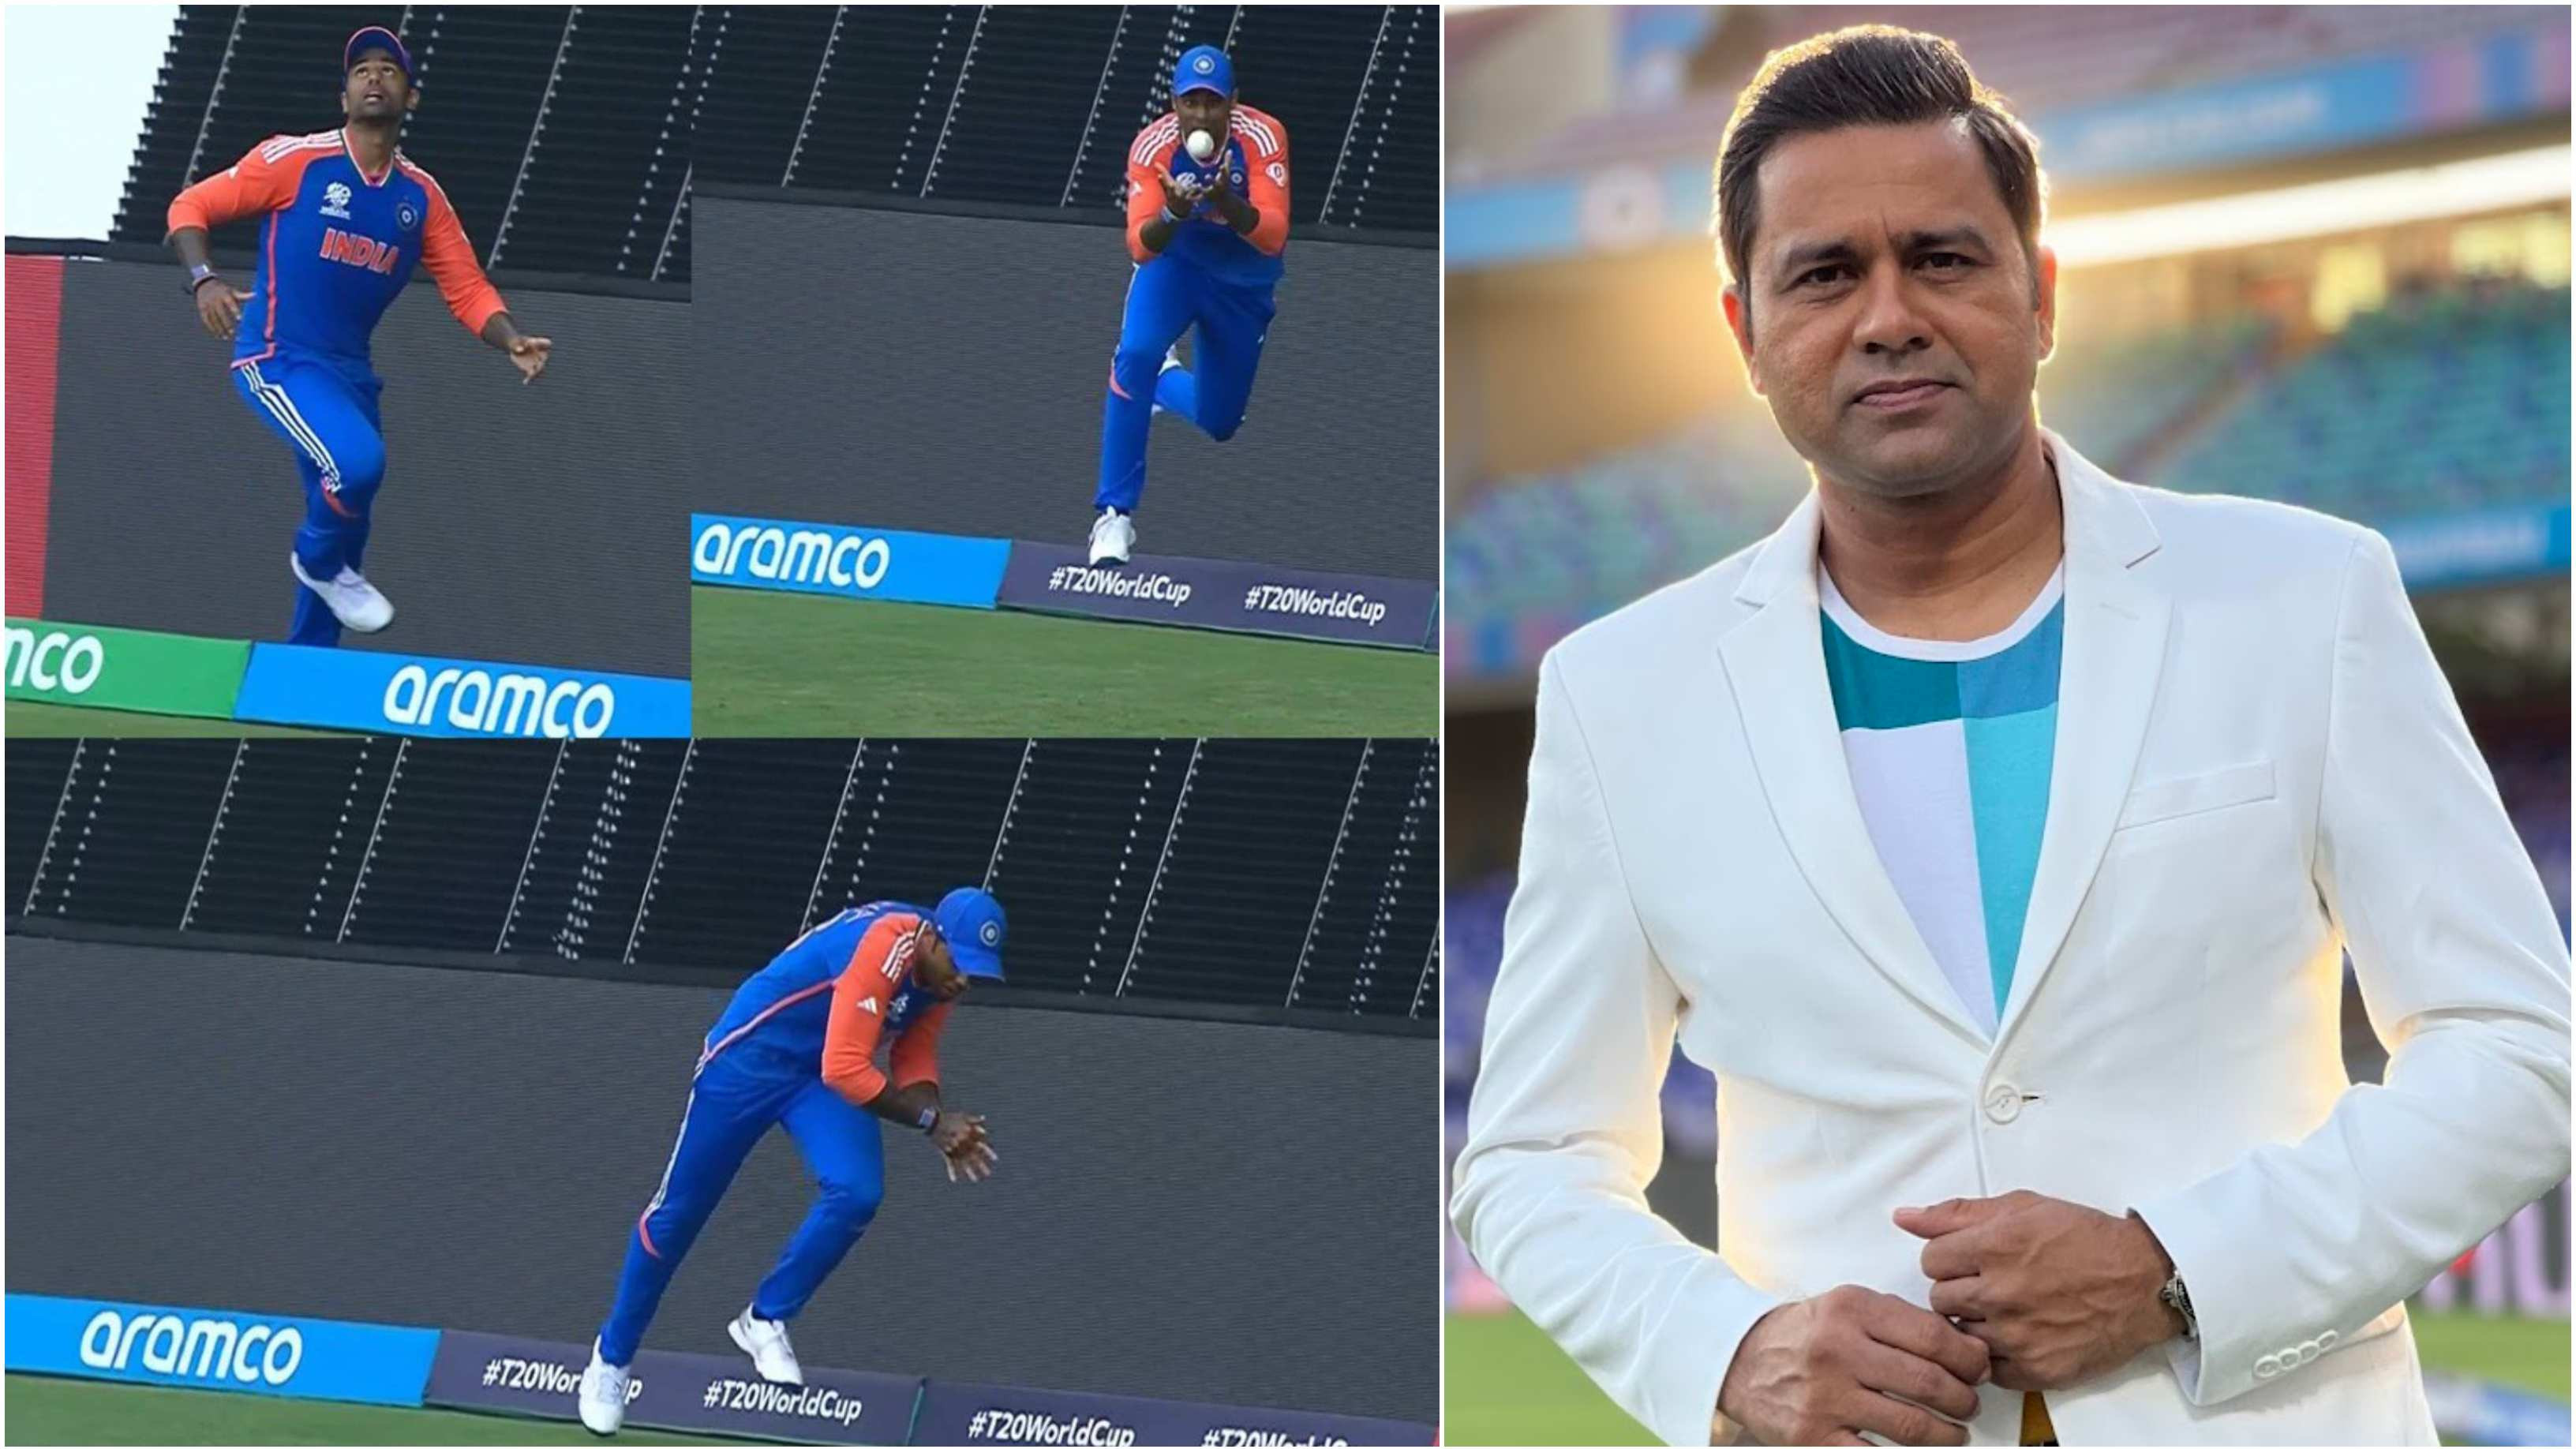 “Push your brain”: Chopra reacts to claims being made about Suryakumar pushing boundary rope before taking Miller’s catch